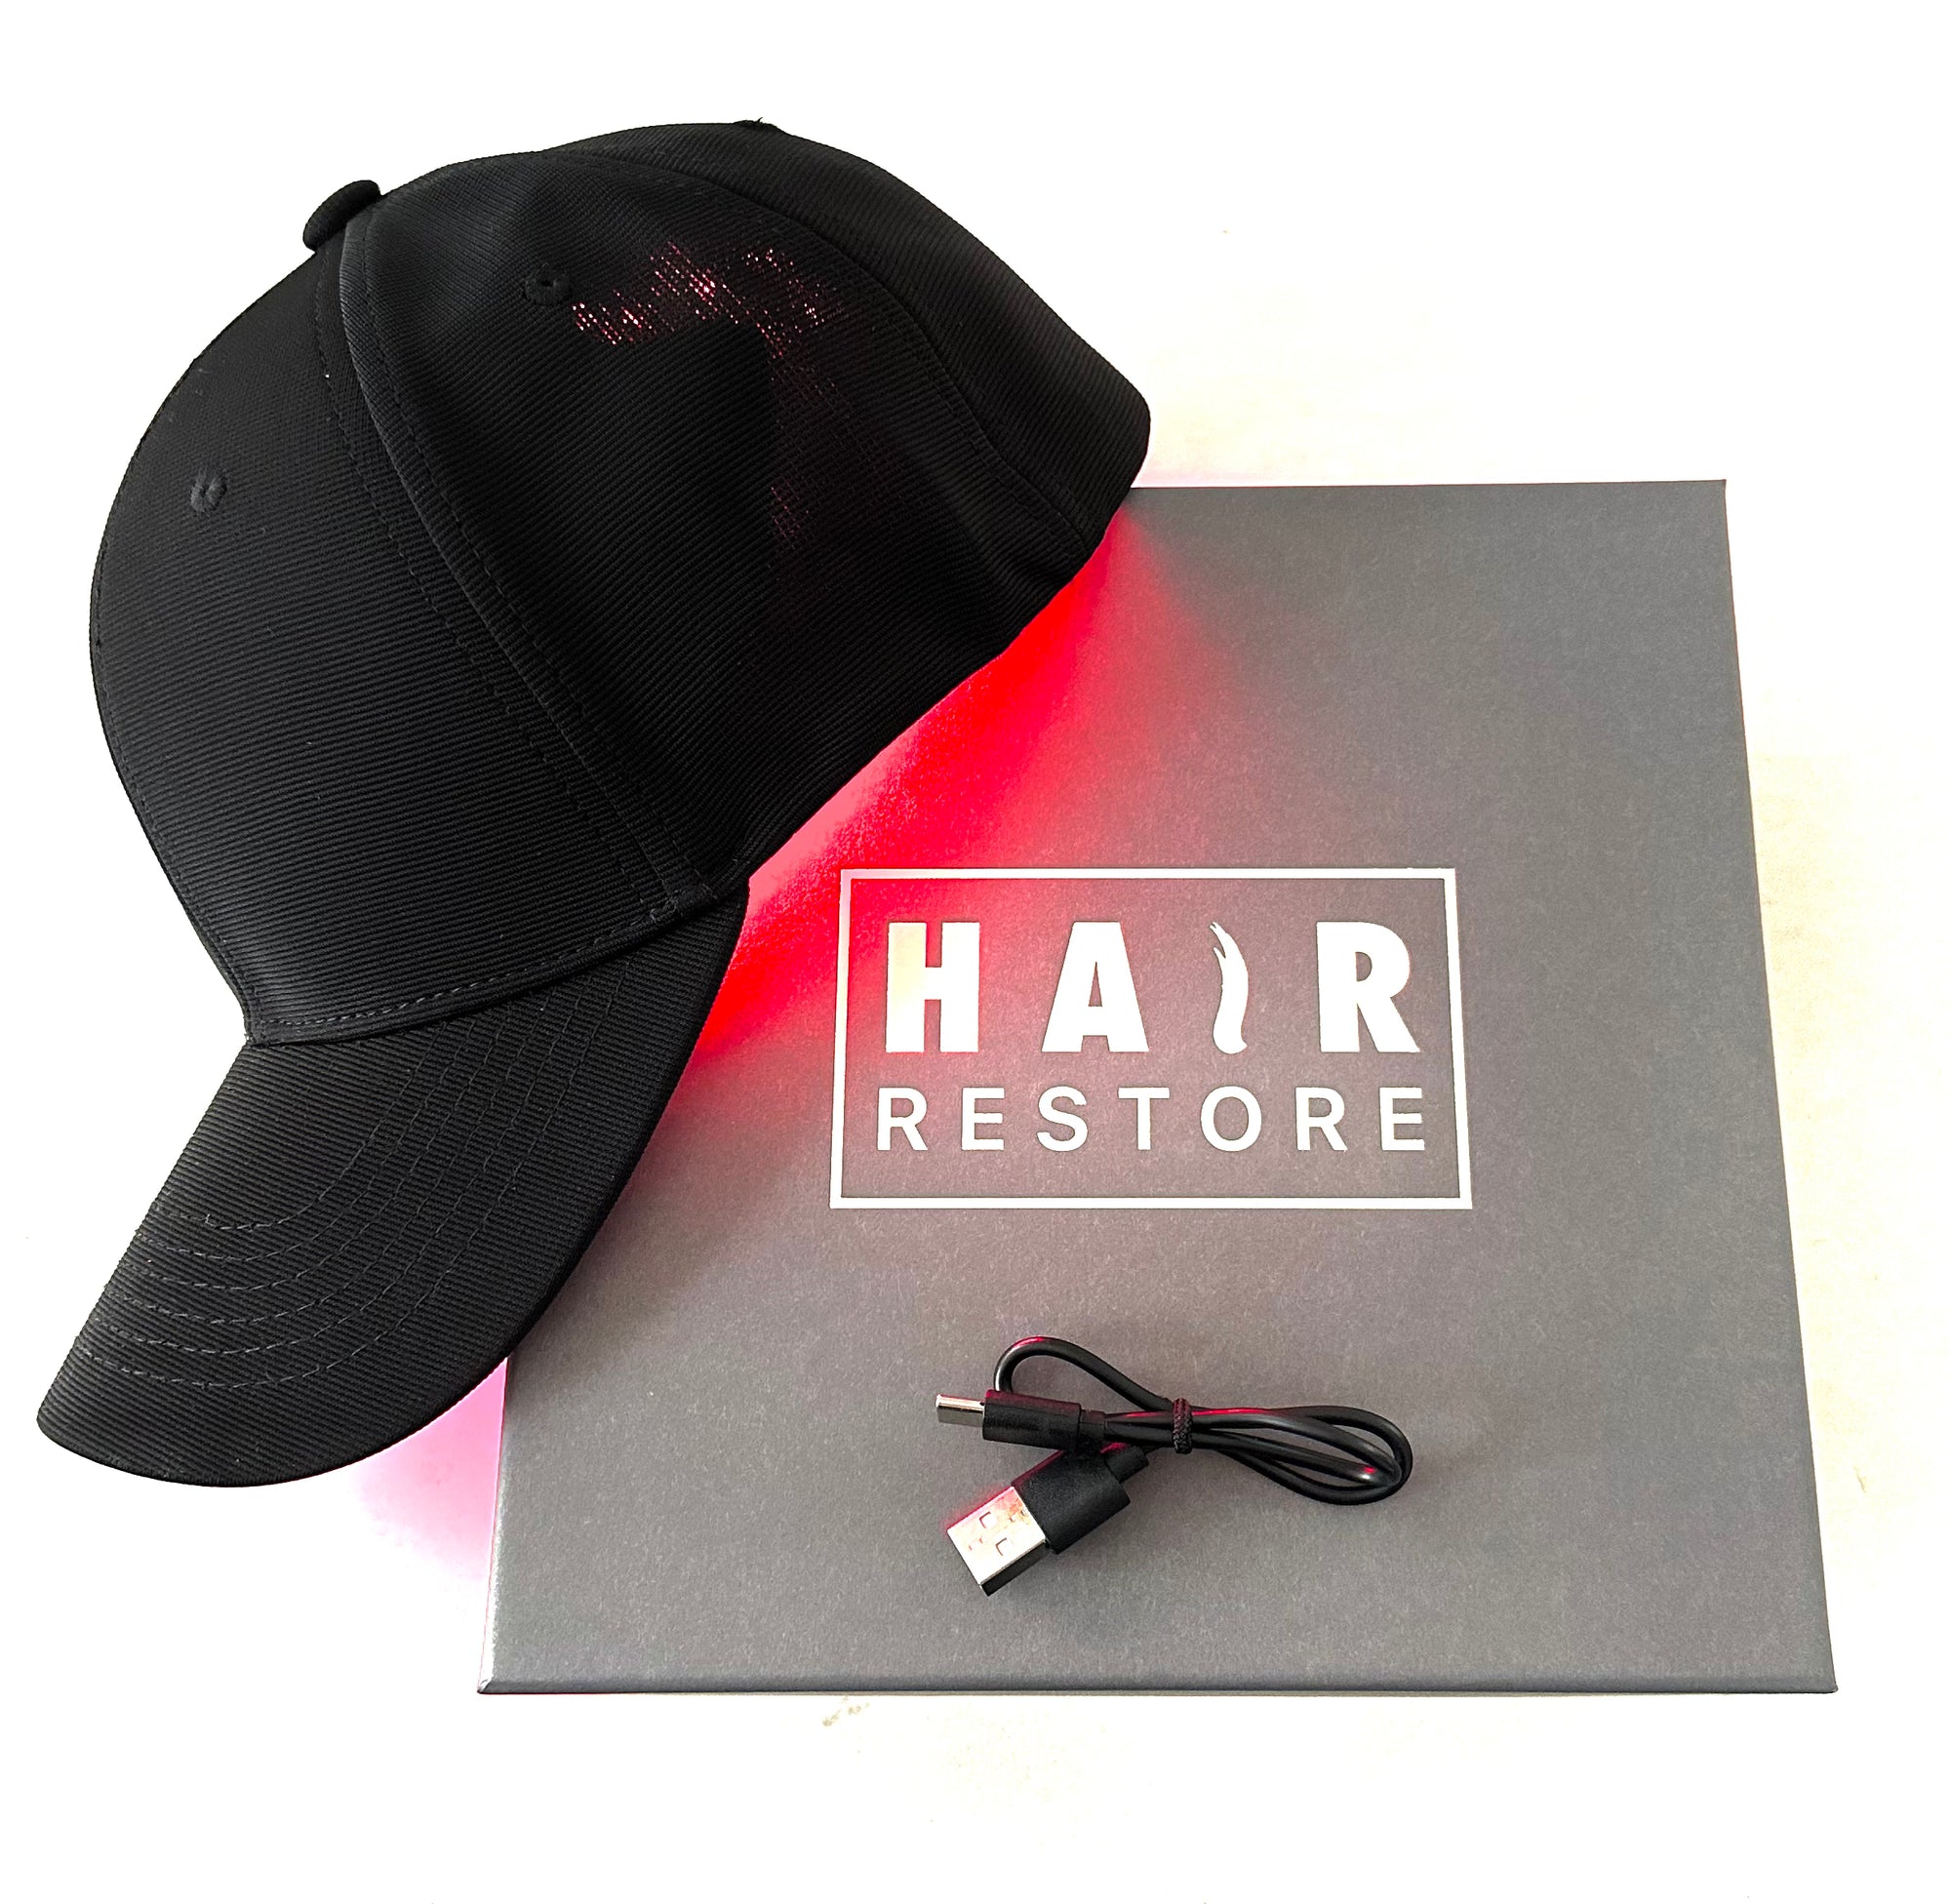 Red Light Infrared Laser Cap for Hair Growth